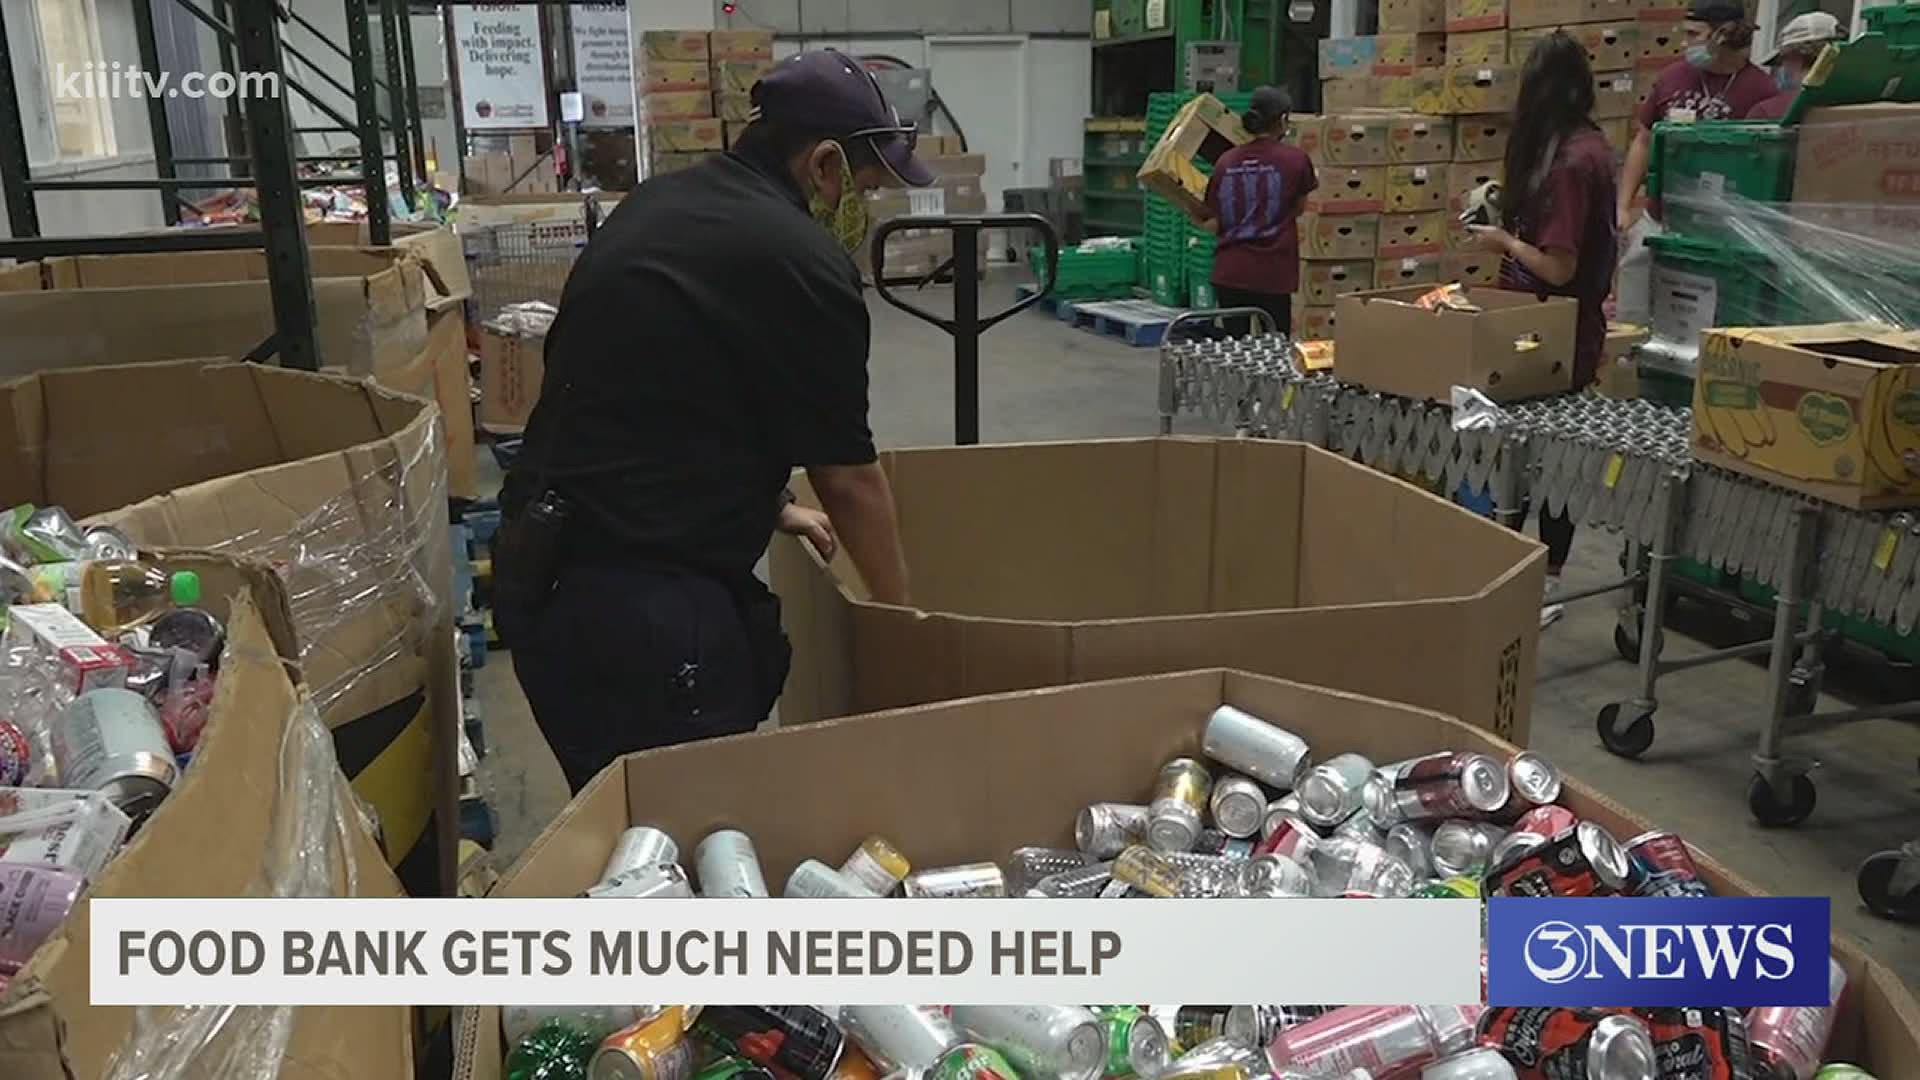 The Coastal Bend Food Bank has faced multiple challenges, but no matter what they continue to help Coastal Bend residents.